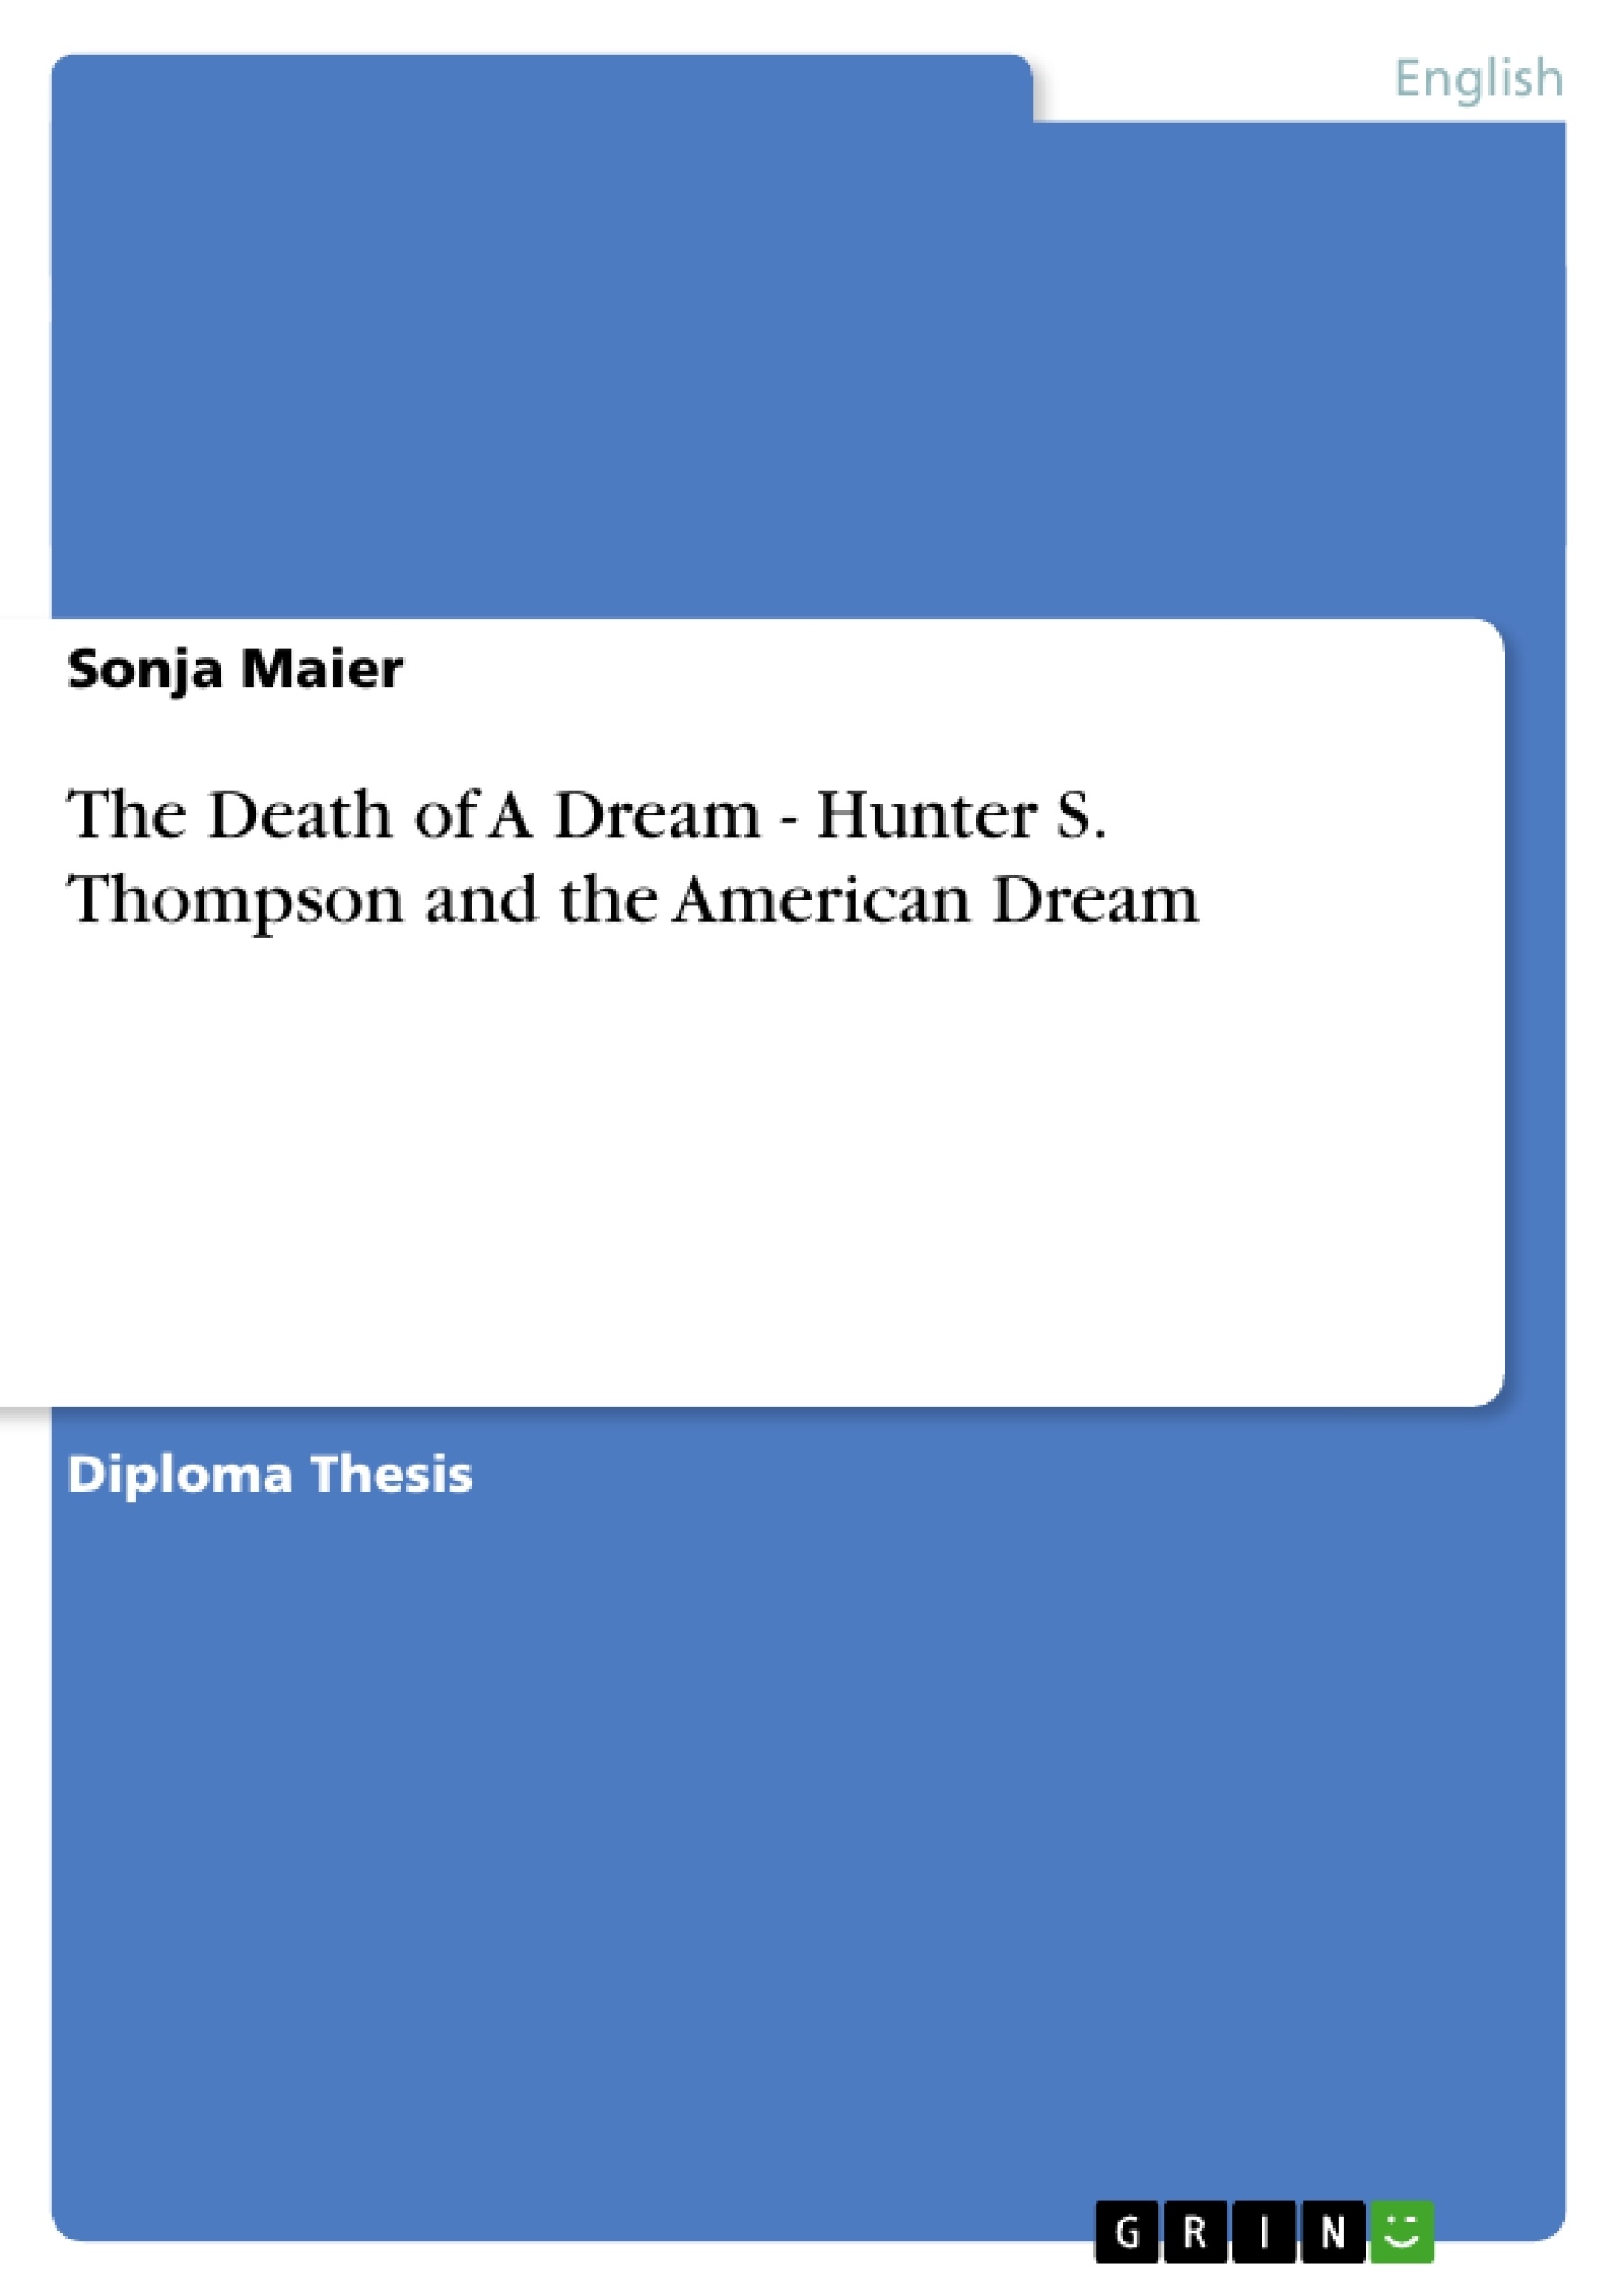 Título: The Death of A Dream - Hunter S. Thompson and the American Dream